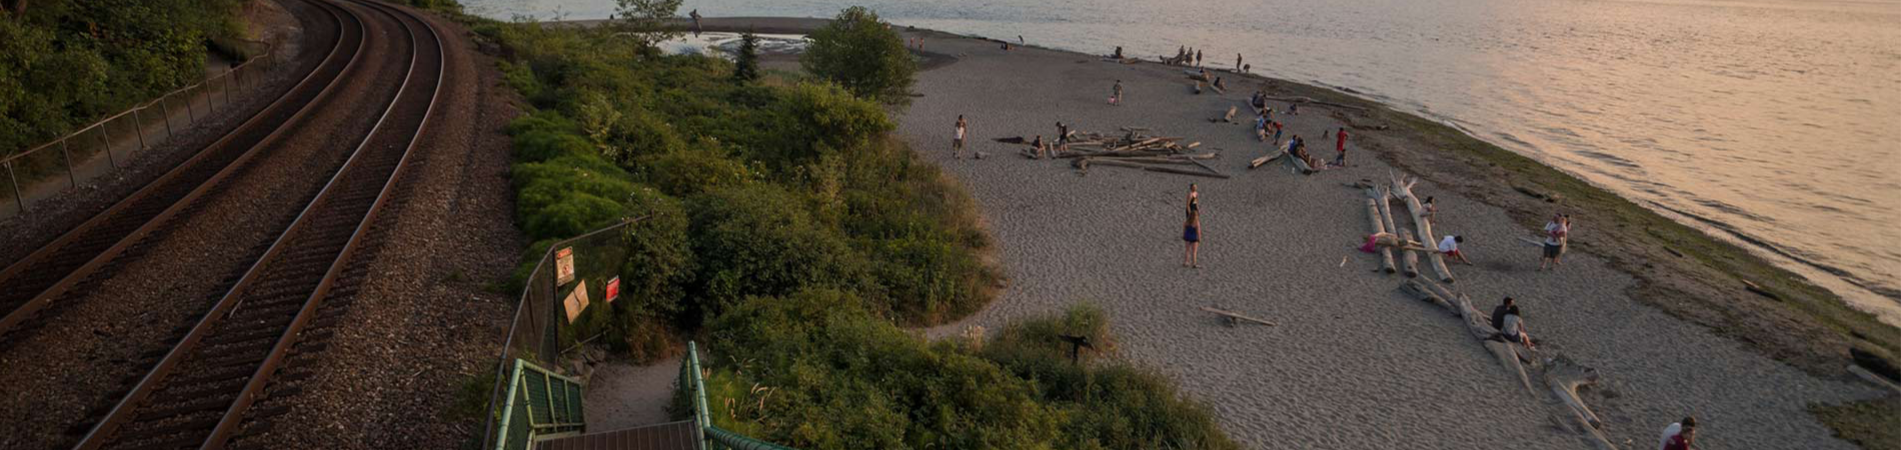 wide shot of carkeek park at sunset: with train tracks on the left and the beach on the right